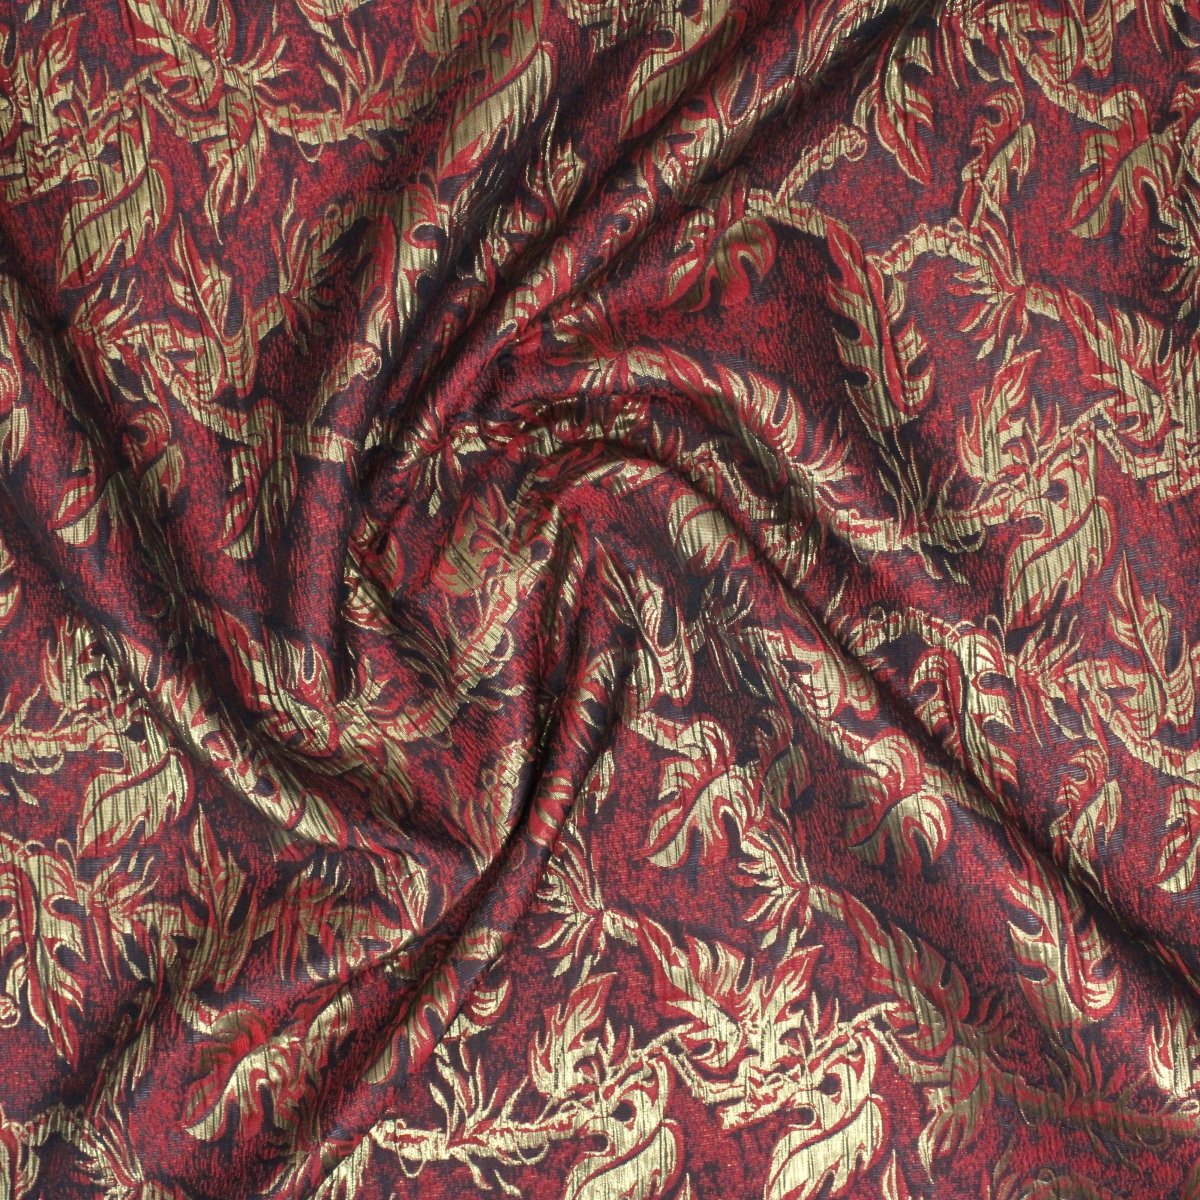 Per Metre Luxury Floral Brocade- 55” Wide (Maroon & Gold Leaves) - Pound A Metre